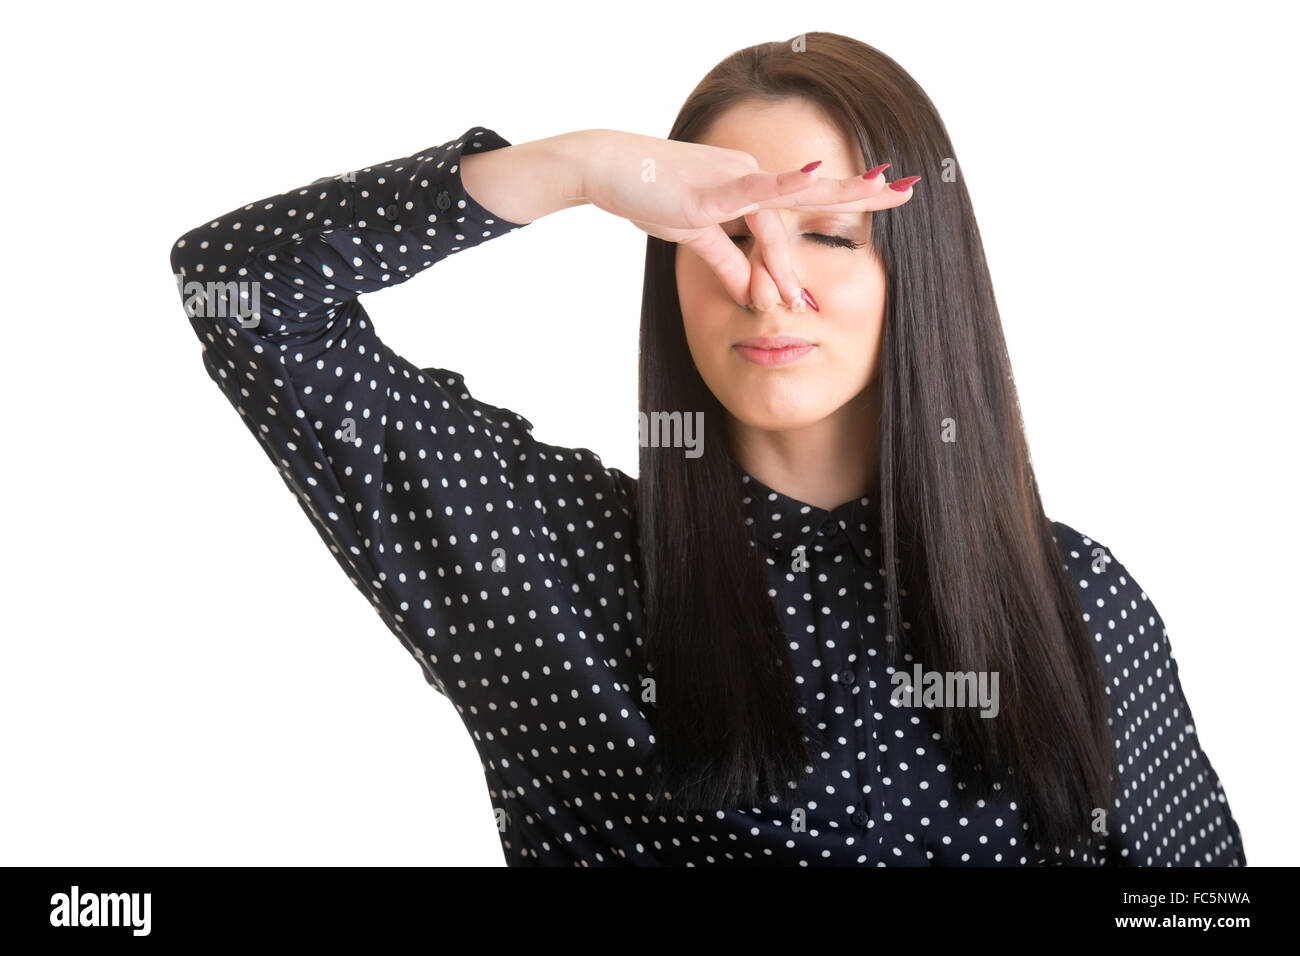 Female covering her nose with her hand, isolated in a white background Stock Photo